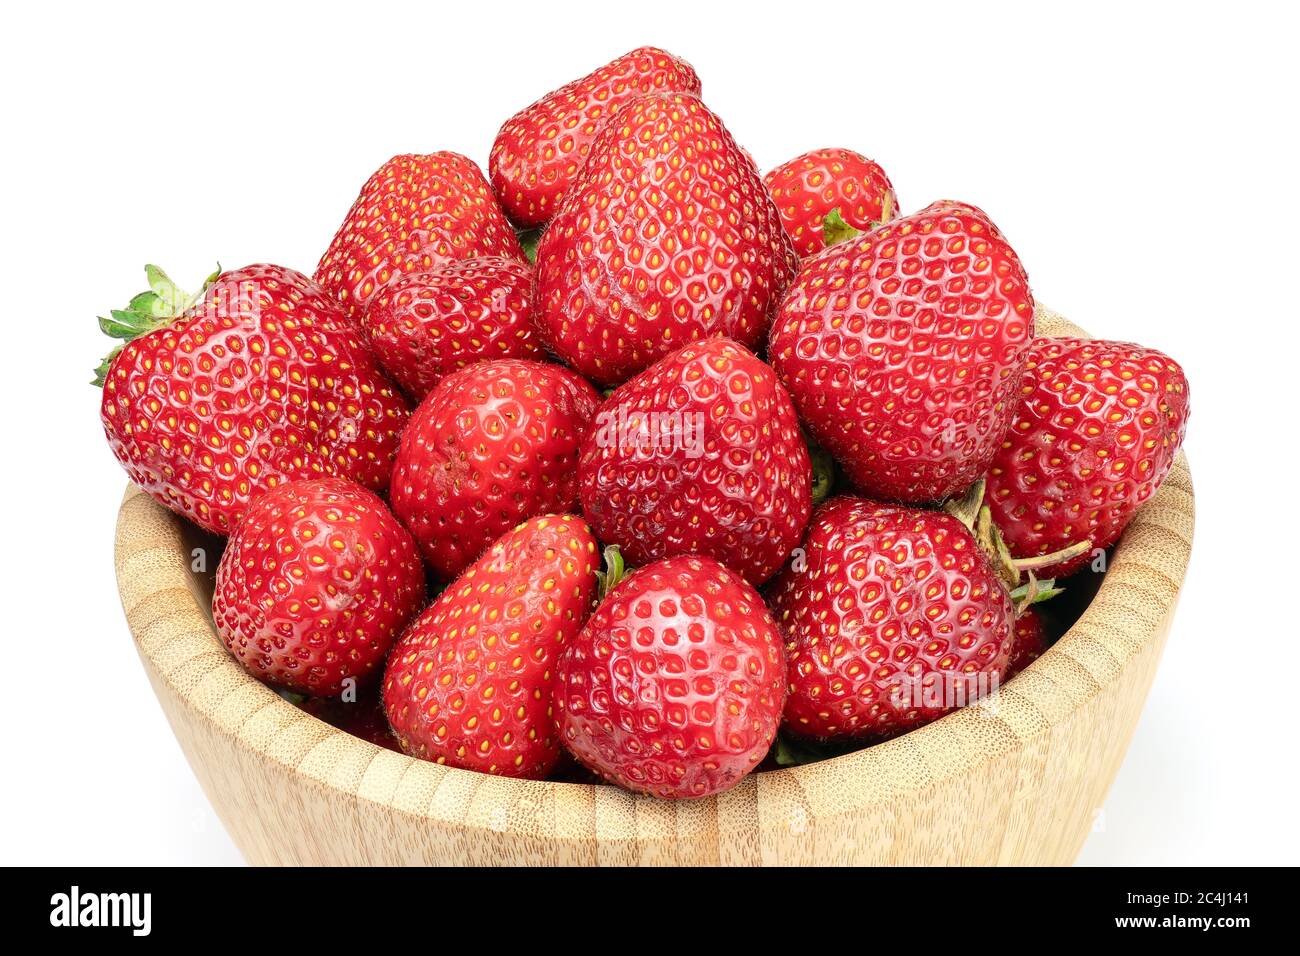 Fresh strawberries in wooden bowl isolated on white background. Full depth of field with clipping path. Stock Photo